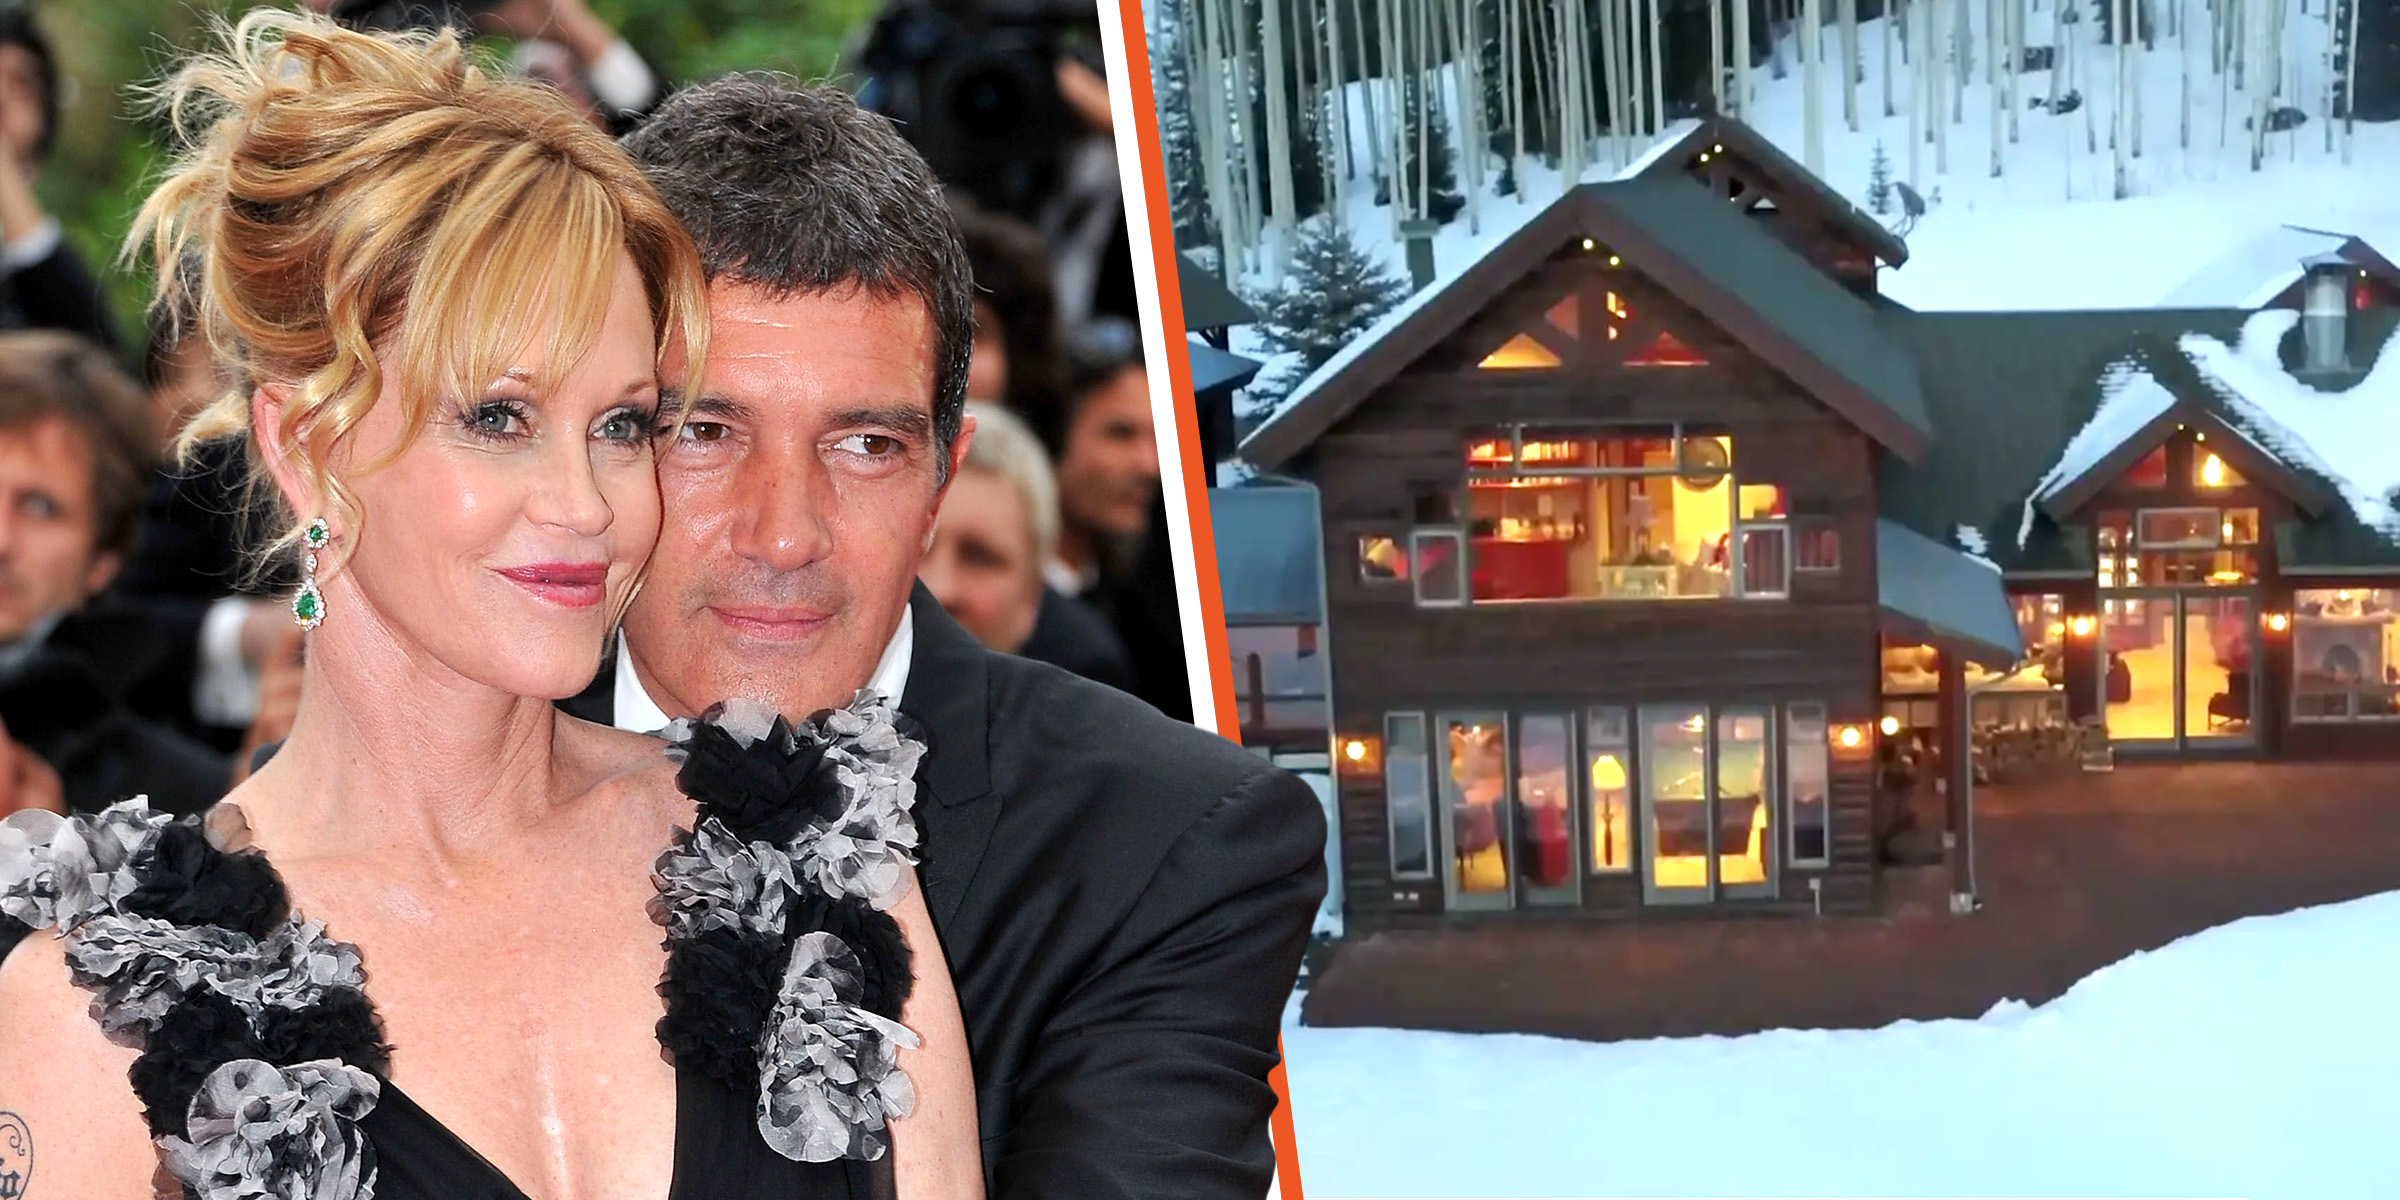 Melanie Griffith and Antonio Banderas | Melani Griffith's former vacation home | Source: Getty Images | youtube.com/ColdwellBankerRealEstateLLC